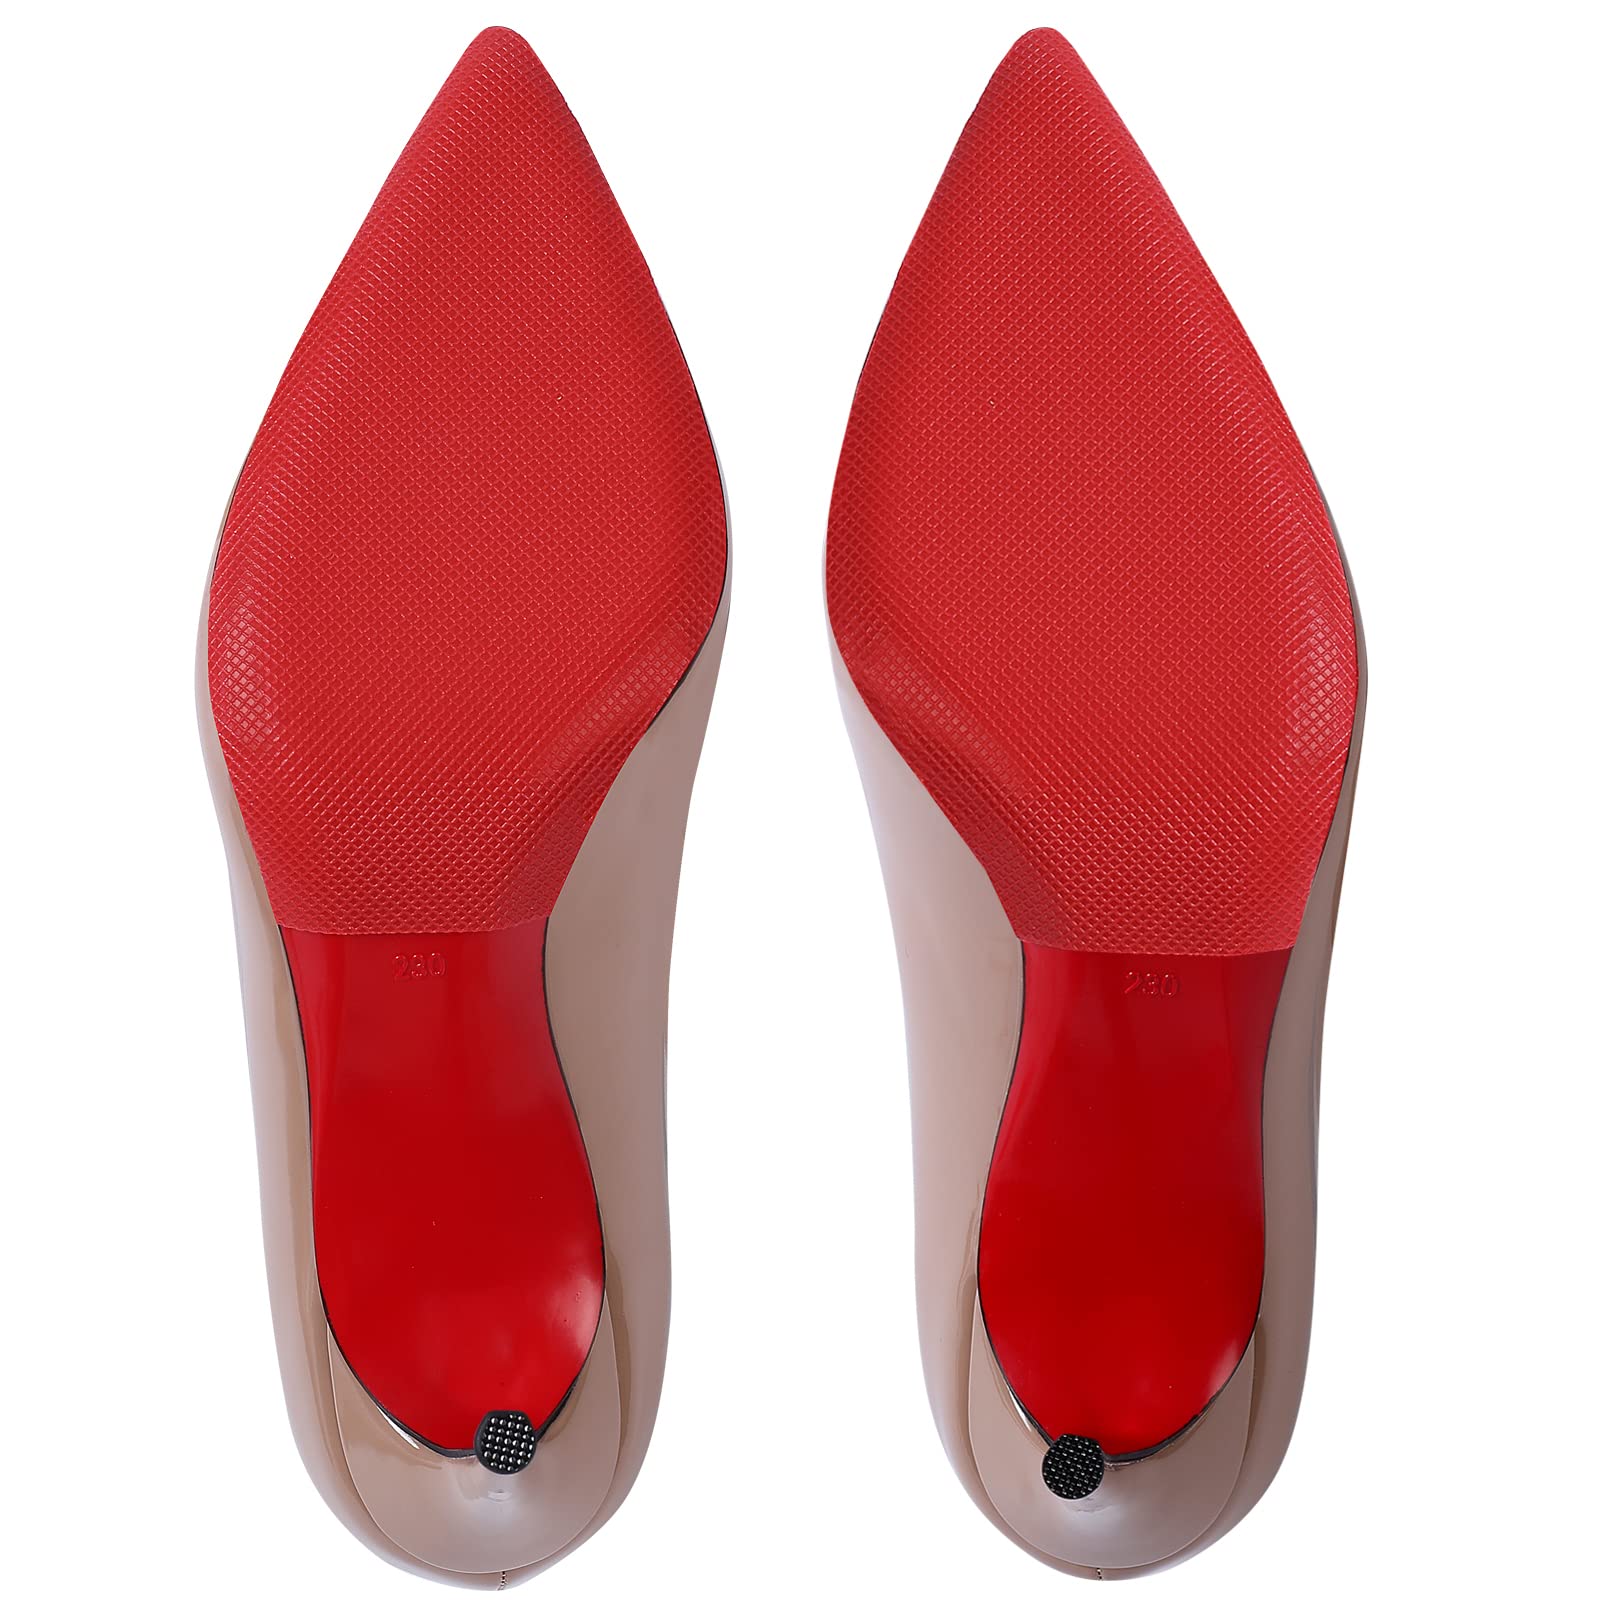 CZBYXA12 Red Shoe Sole Protector for Womens High-Heels,Red Bottom  Protectors,Shoe Grips on Bottom of Shoes,Non Slip Shoe Pads,Shoe Sole  Guard,Soul